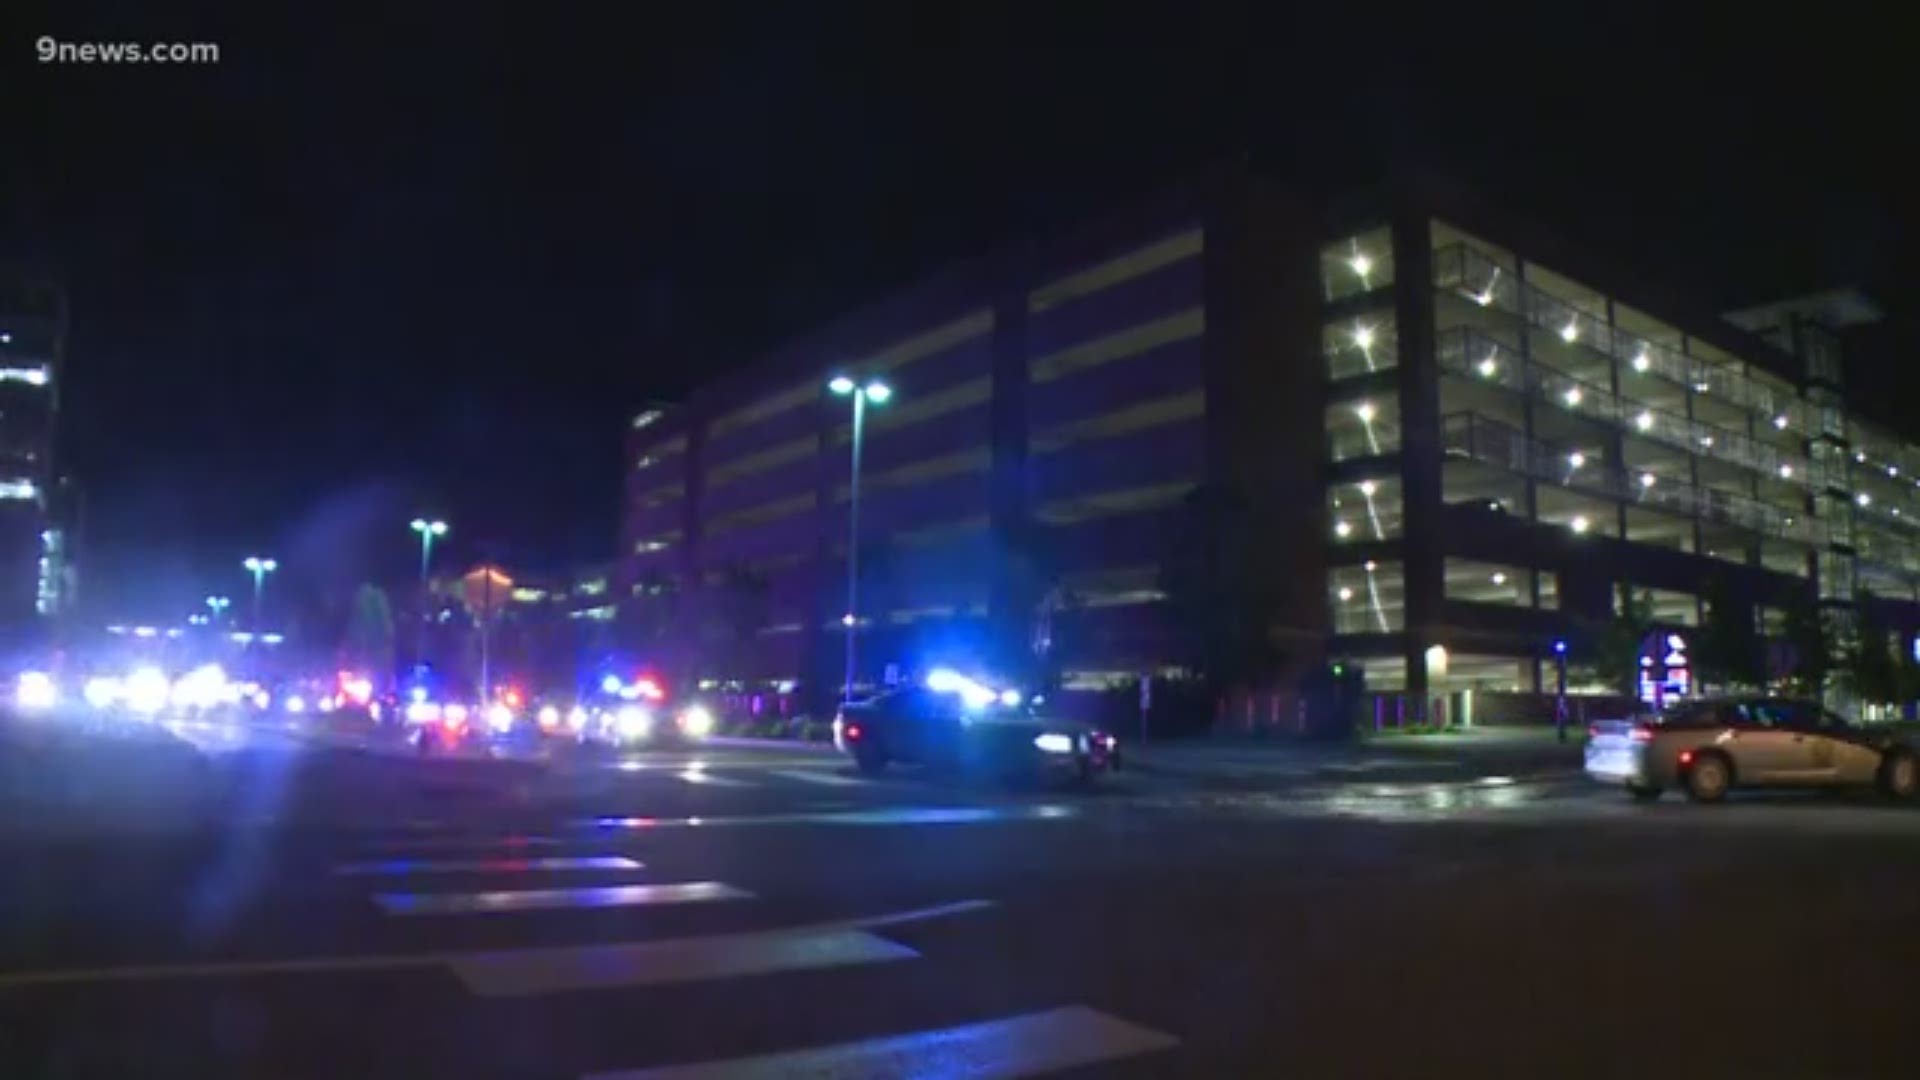 A procession pays tribute to a Colorado State Patrol trooper killed in a crash late Friday night on I-70. The procession left from University Hospital just before 3 a.m. Saturday morning.